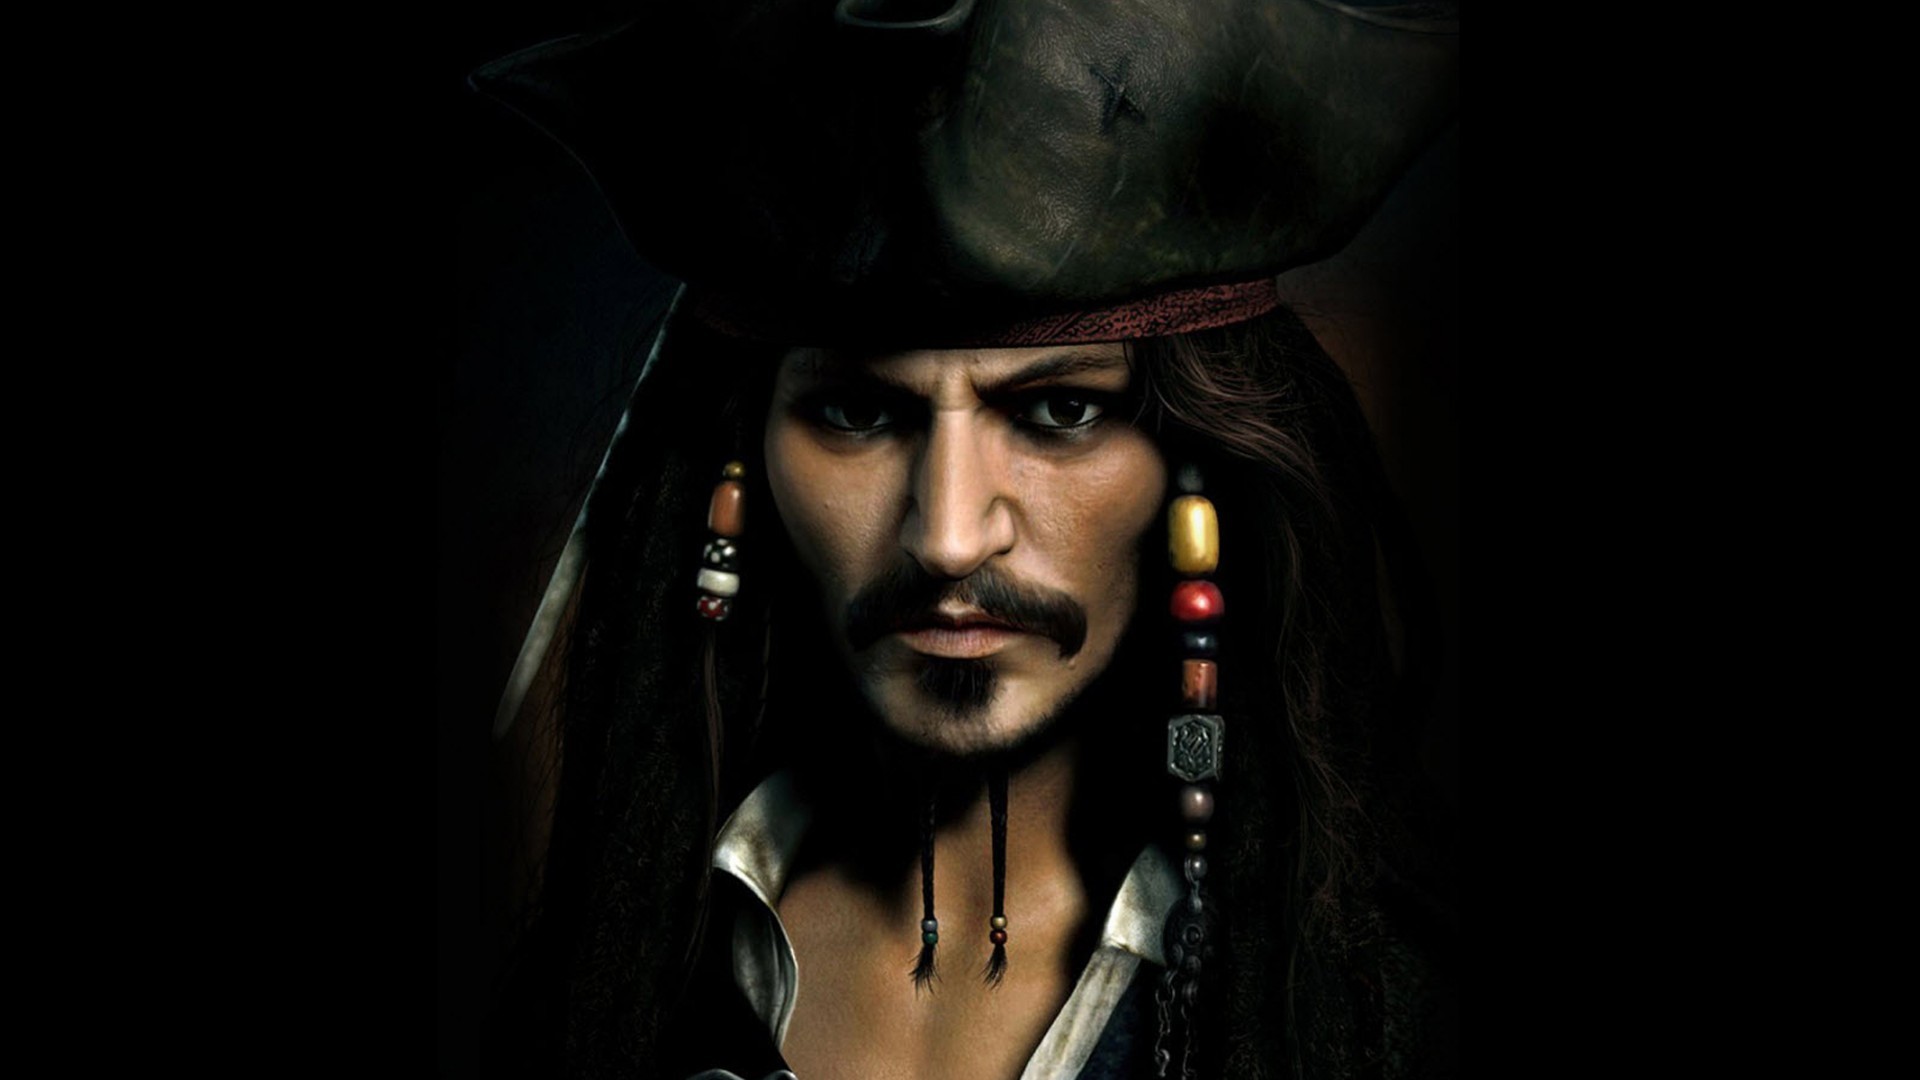 General 1920x1080 Pirates of the Caribbean Jack Sparrow pirates movies